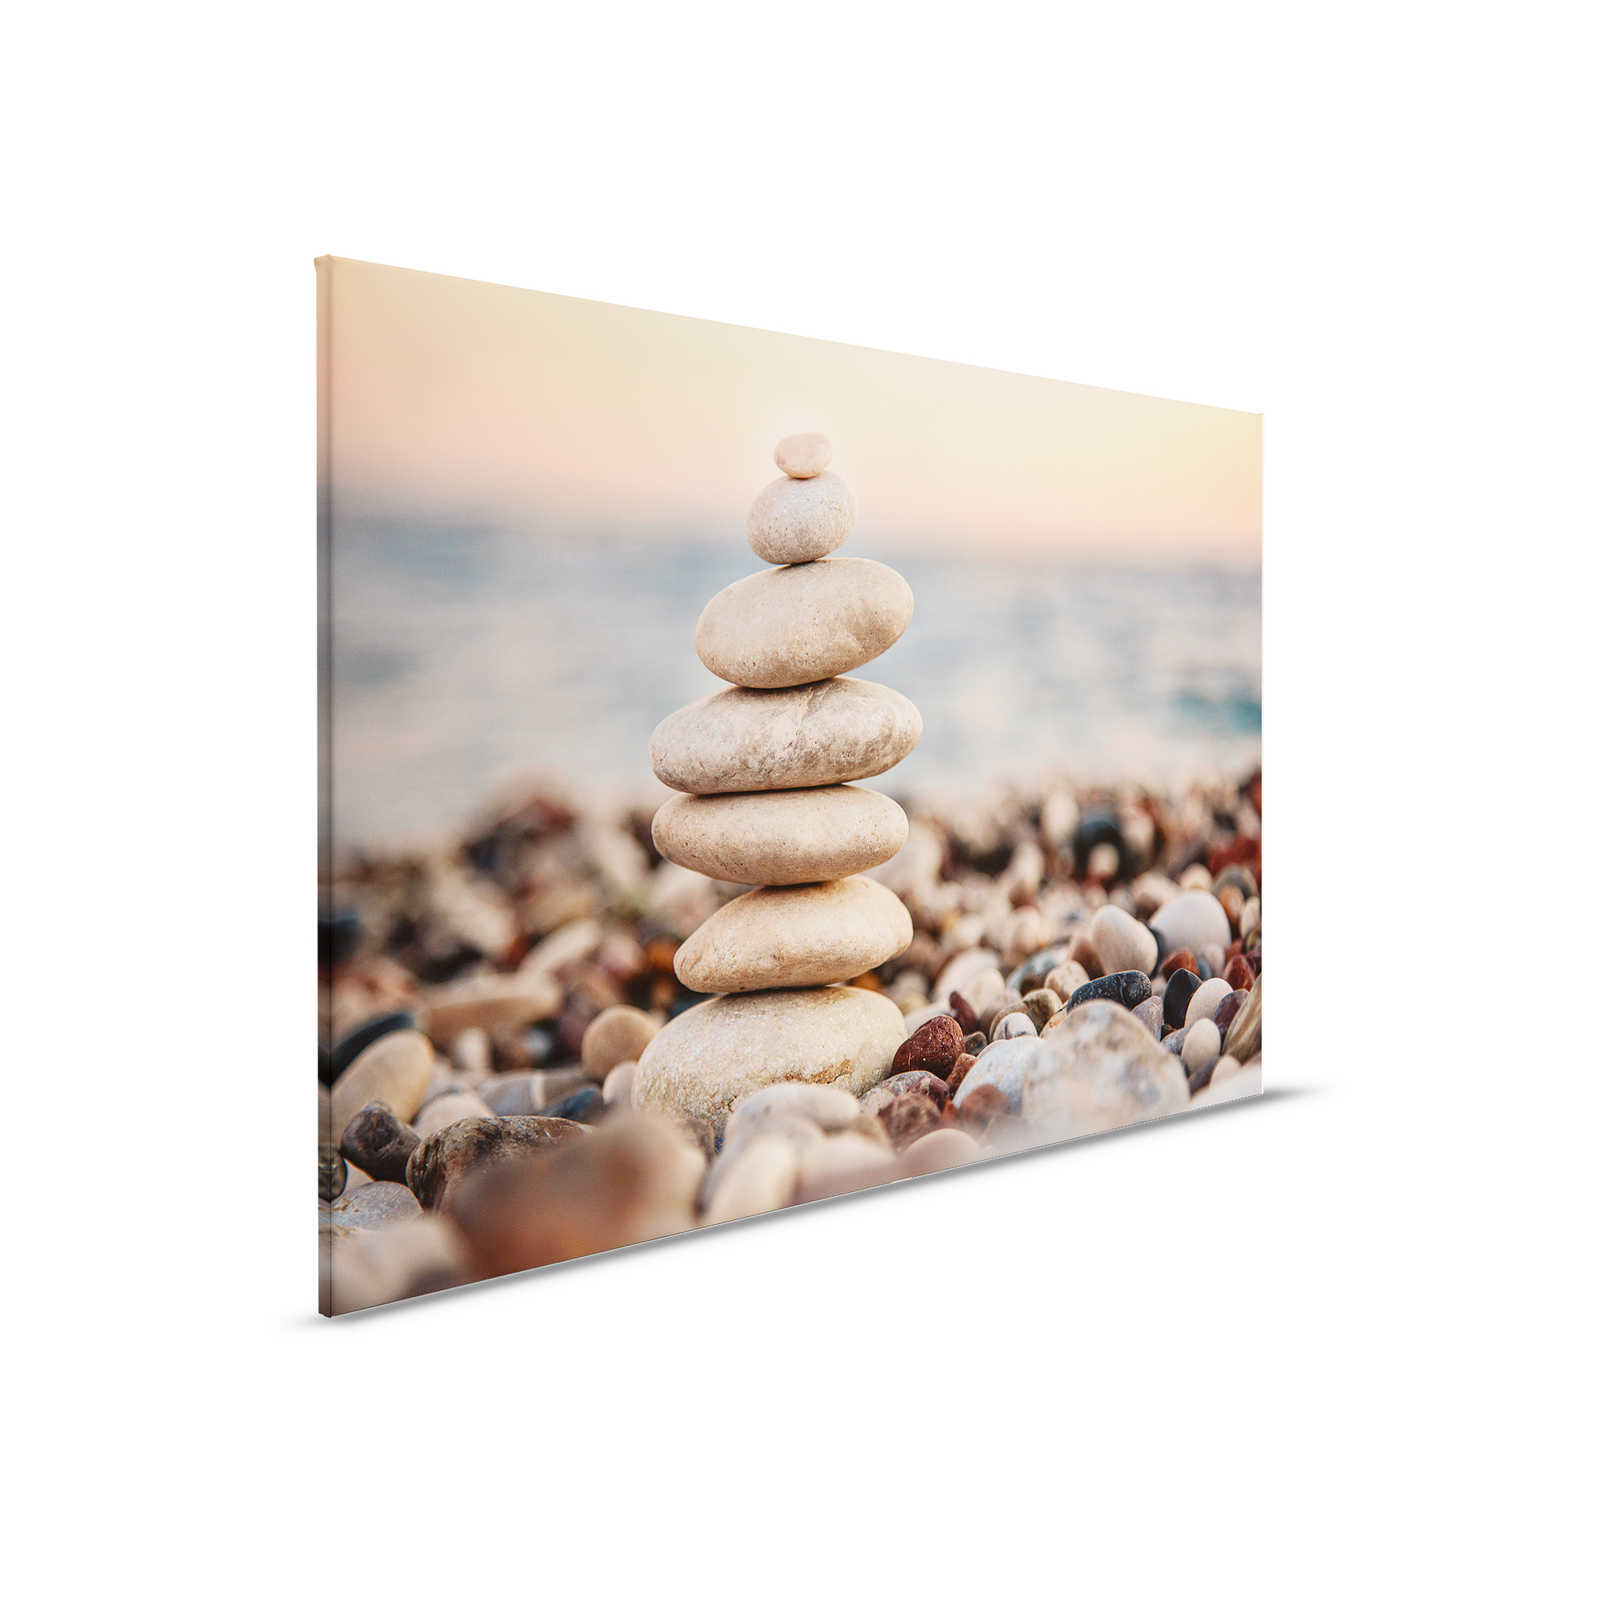         Canvas with stone tower by the sea | grey, blue, orange - 0.90 m x 0.60 m
    